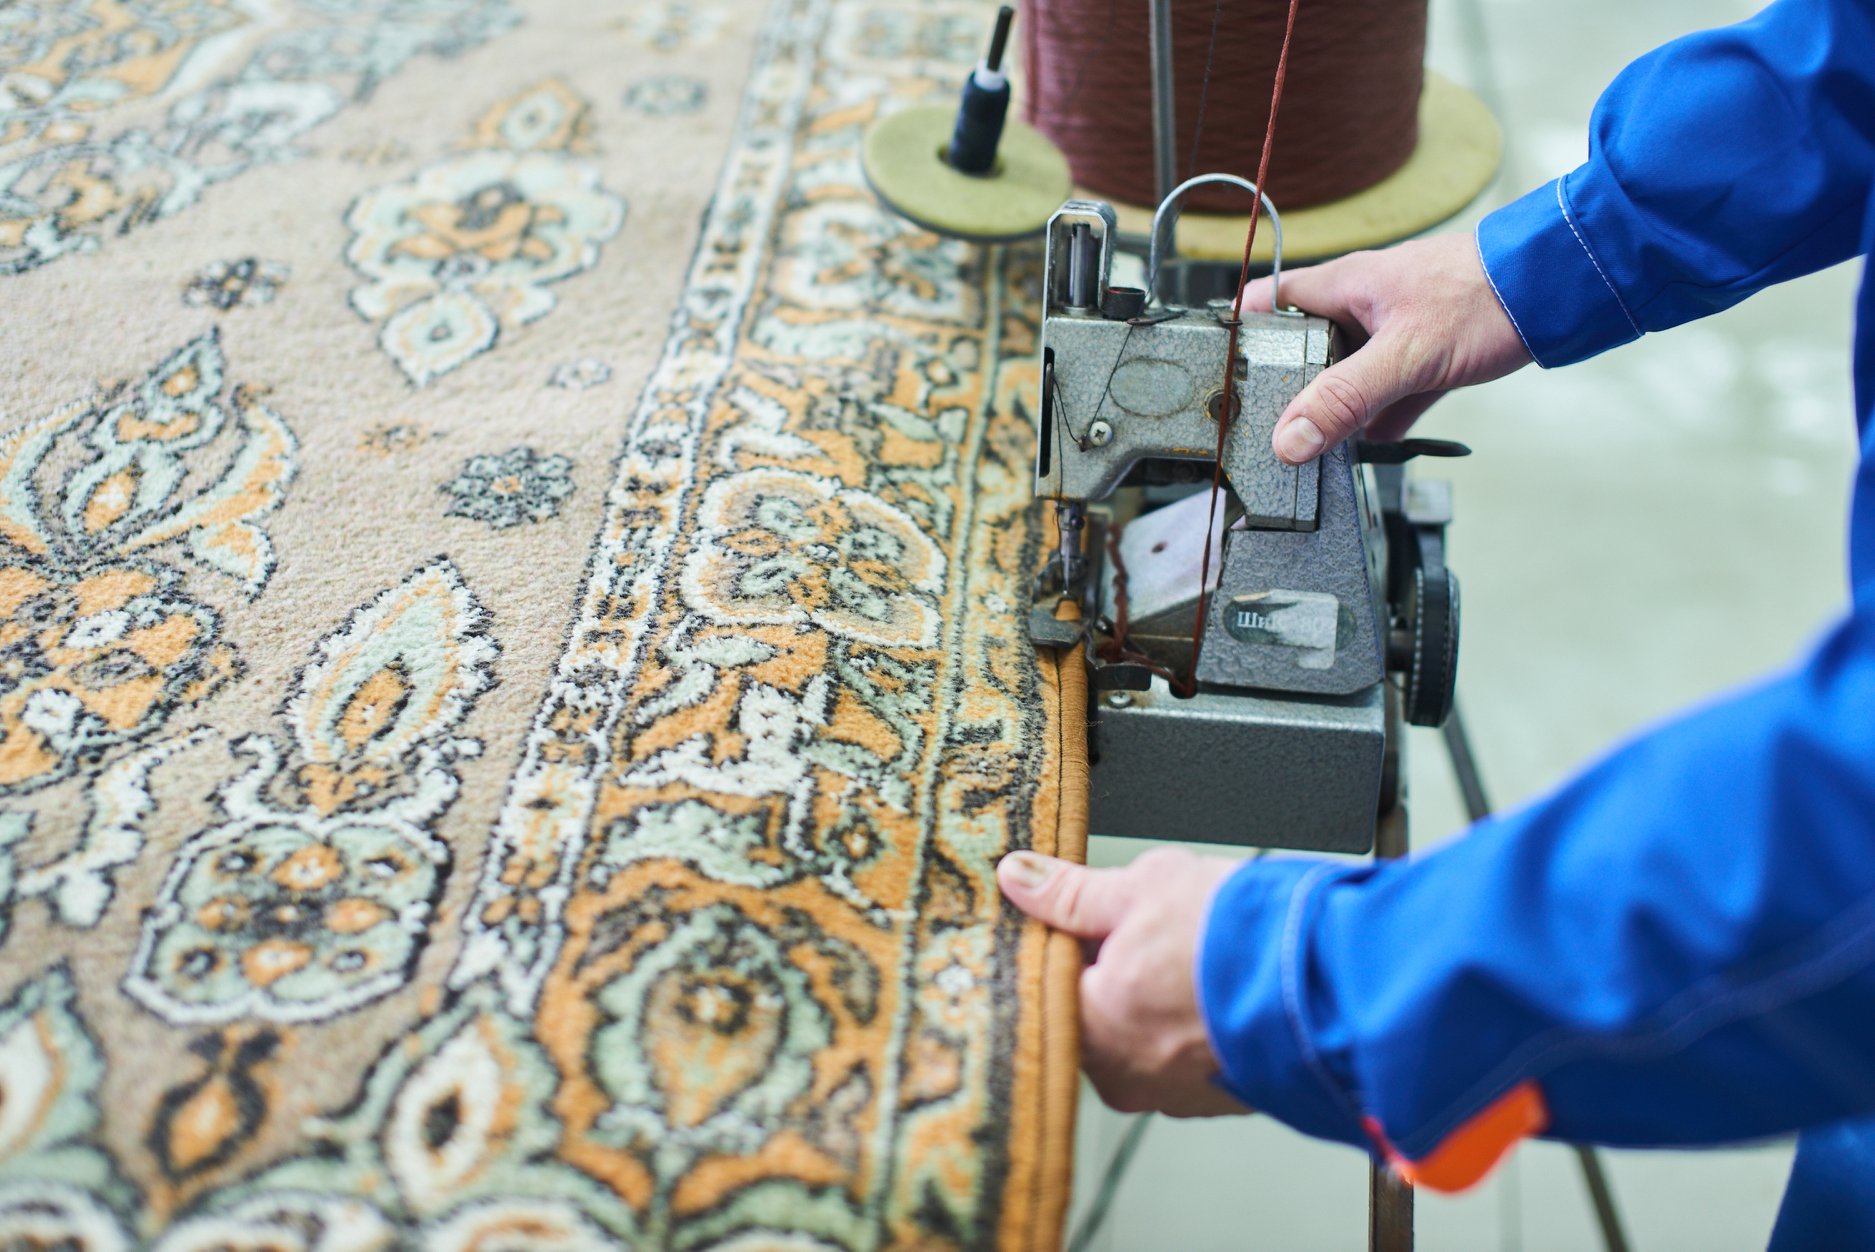 professional carpet binding for large area rug - Springfield, IL